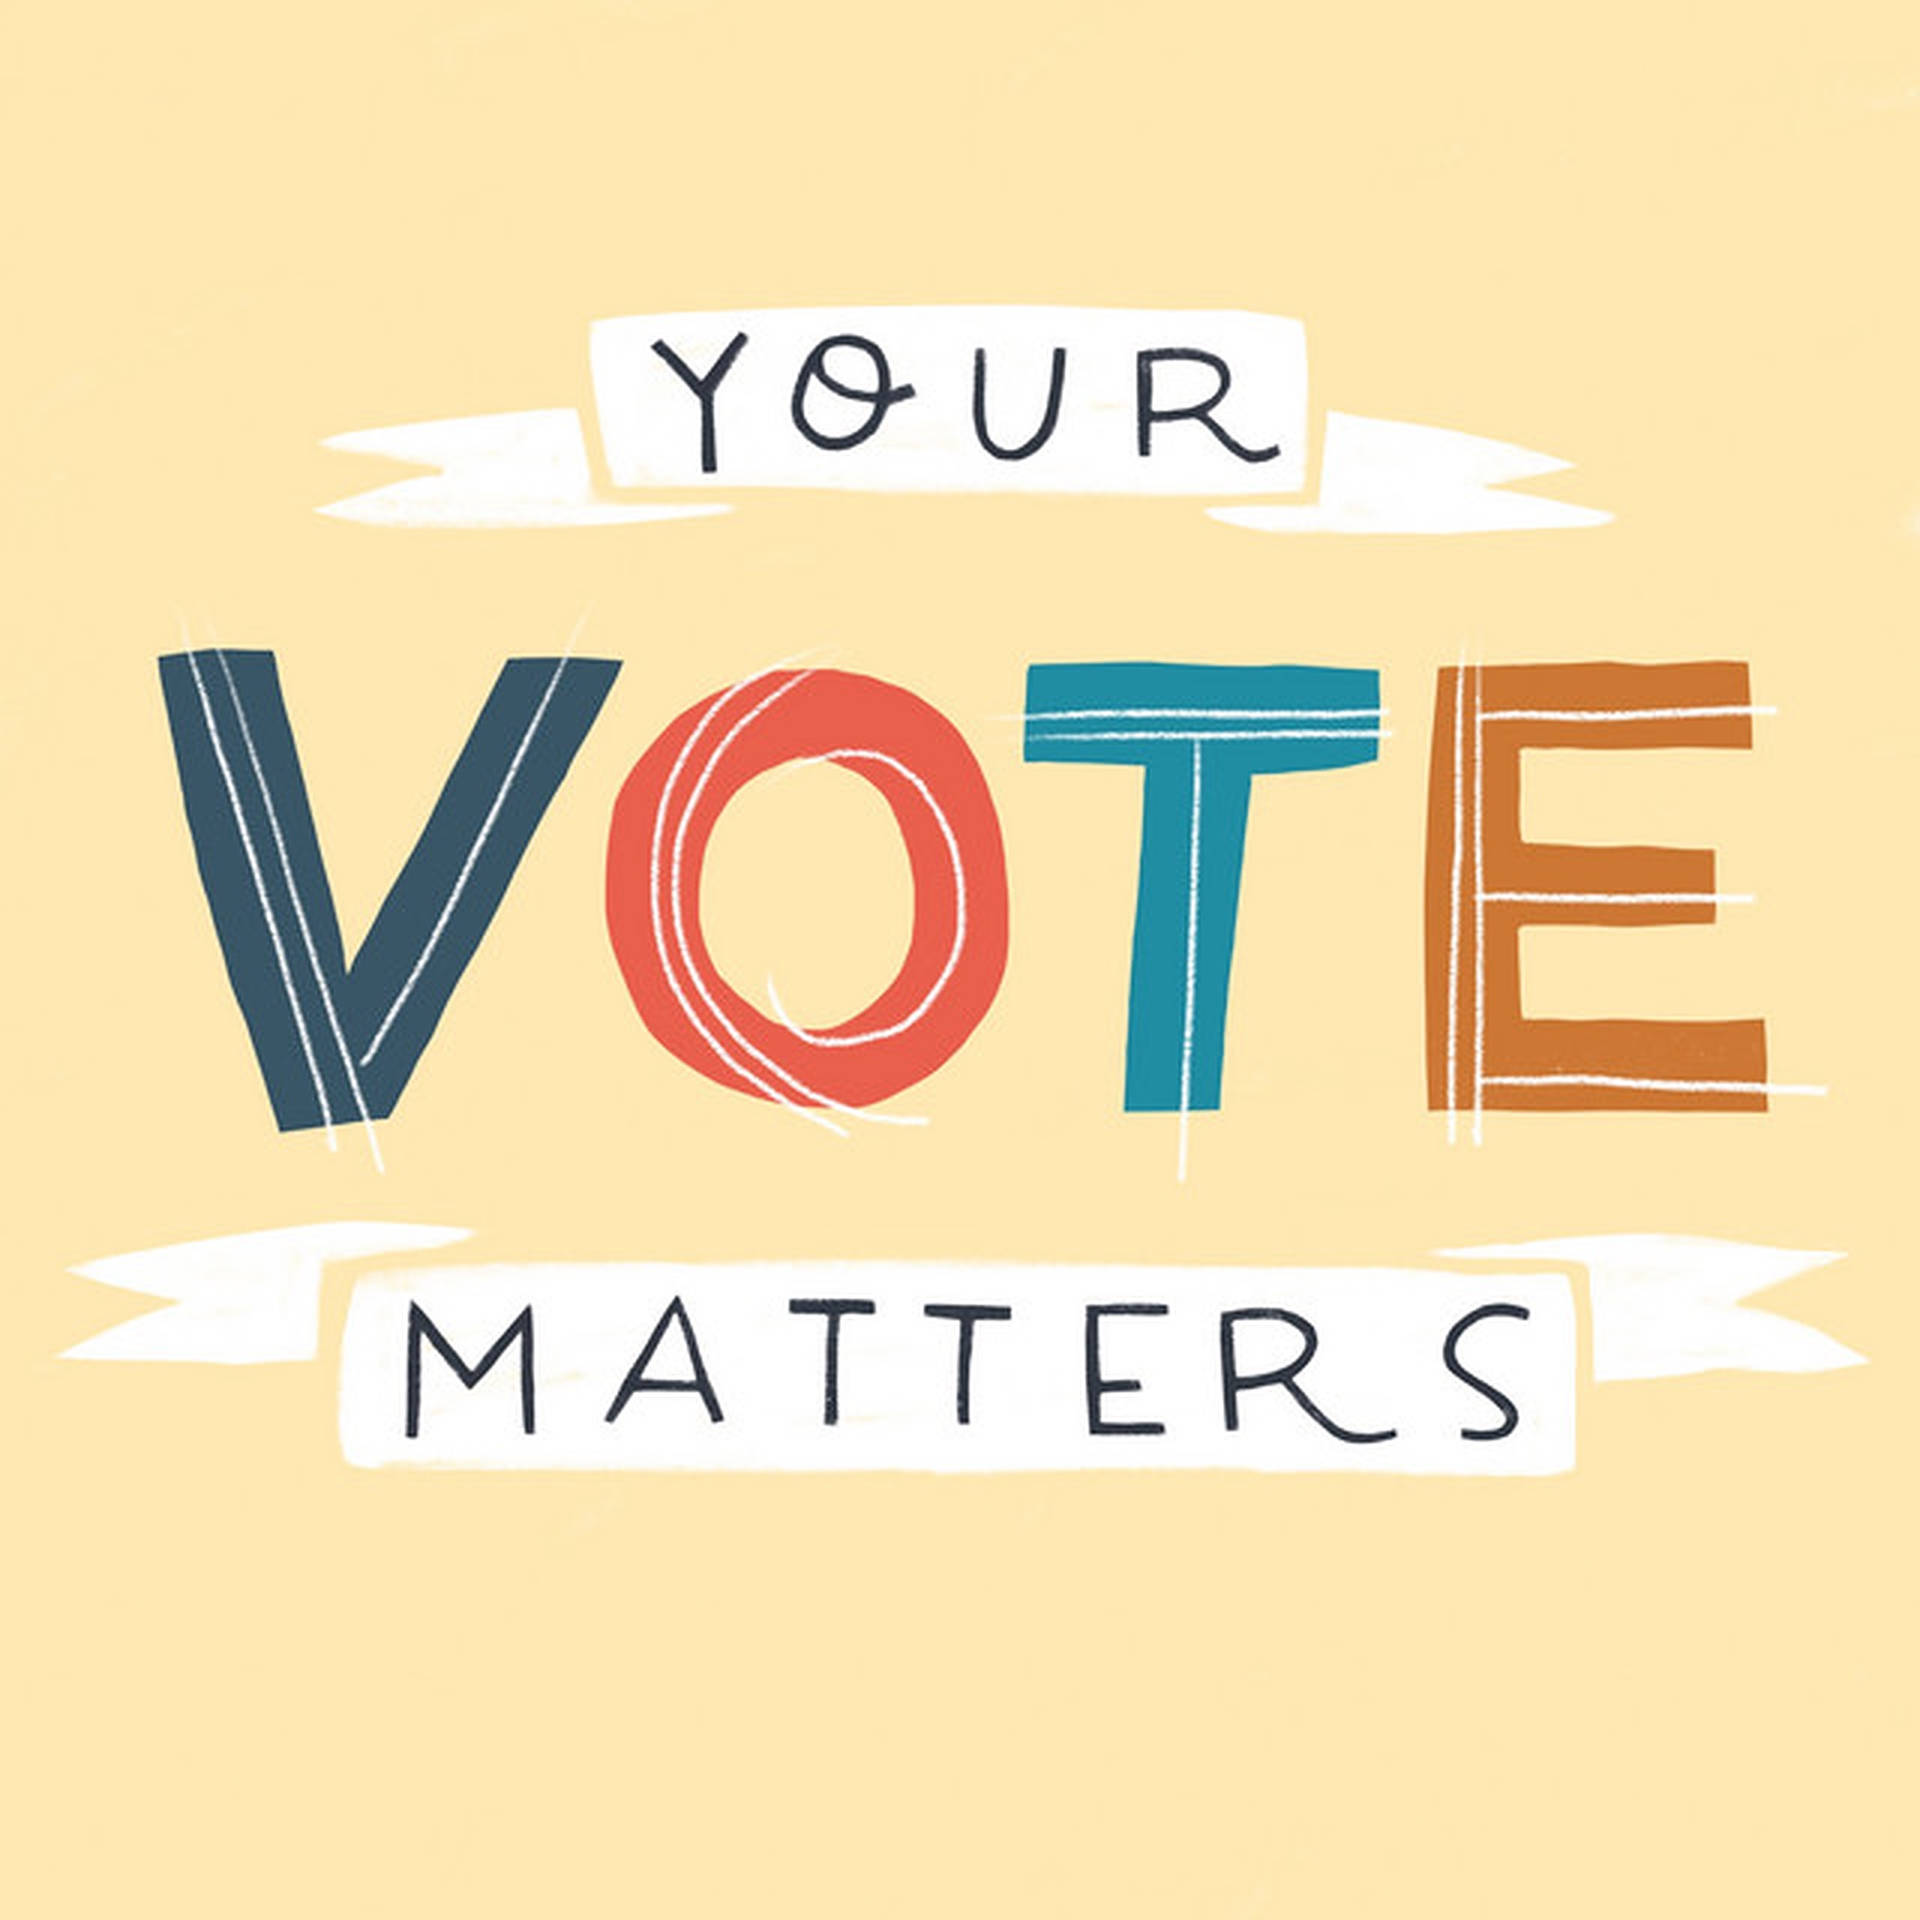 Election Your Vote Matters